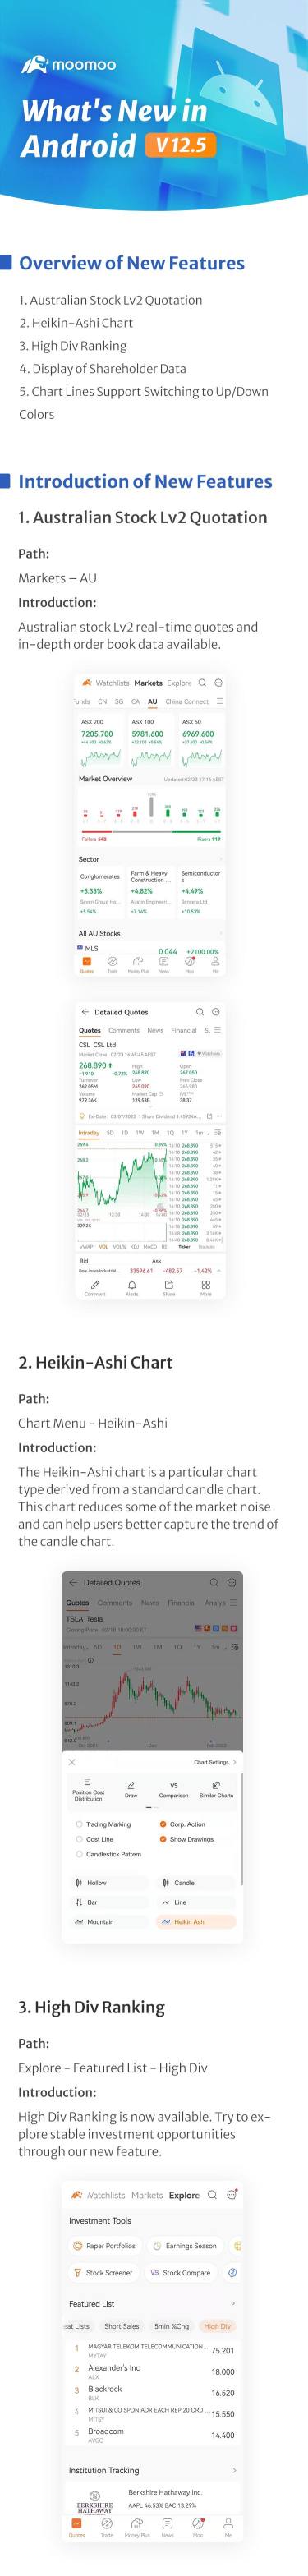 What's New: The Heikin-Ashi Chart Available in Android v12.5